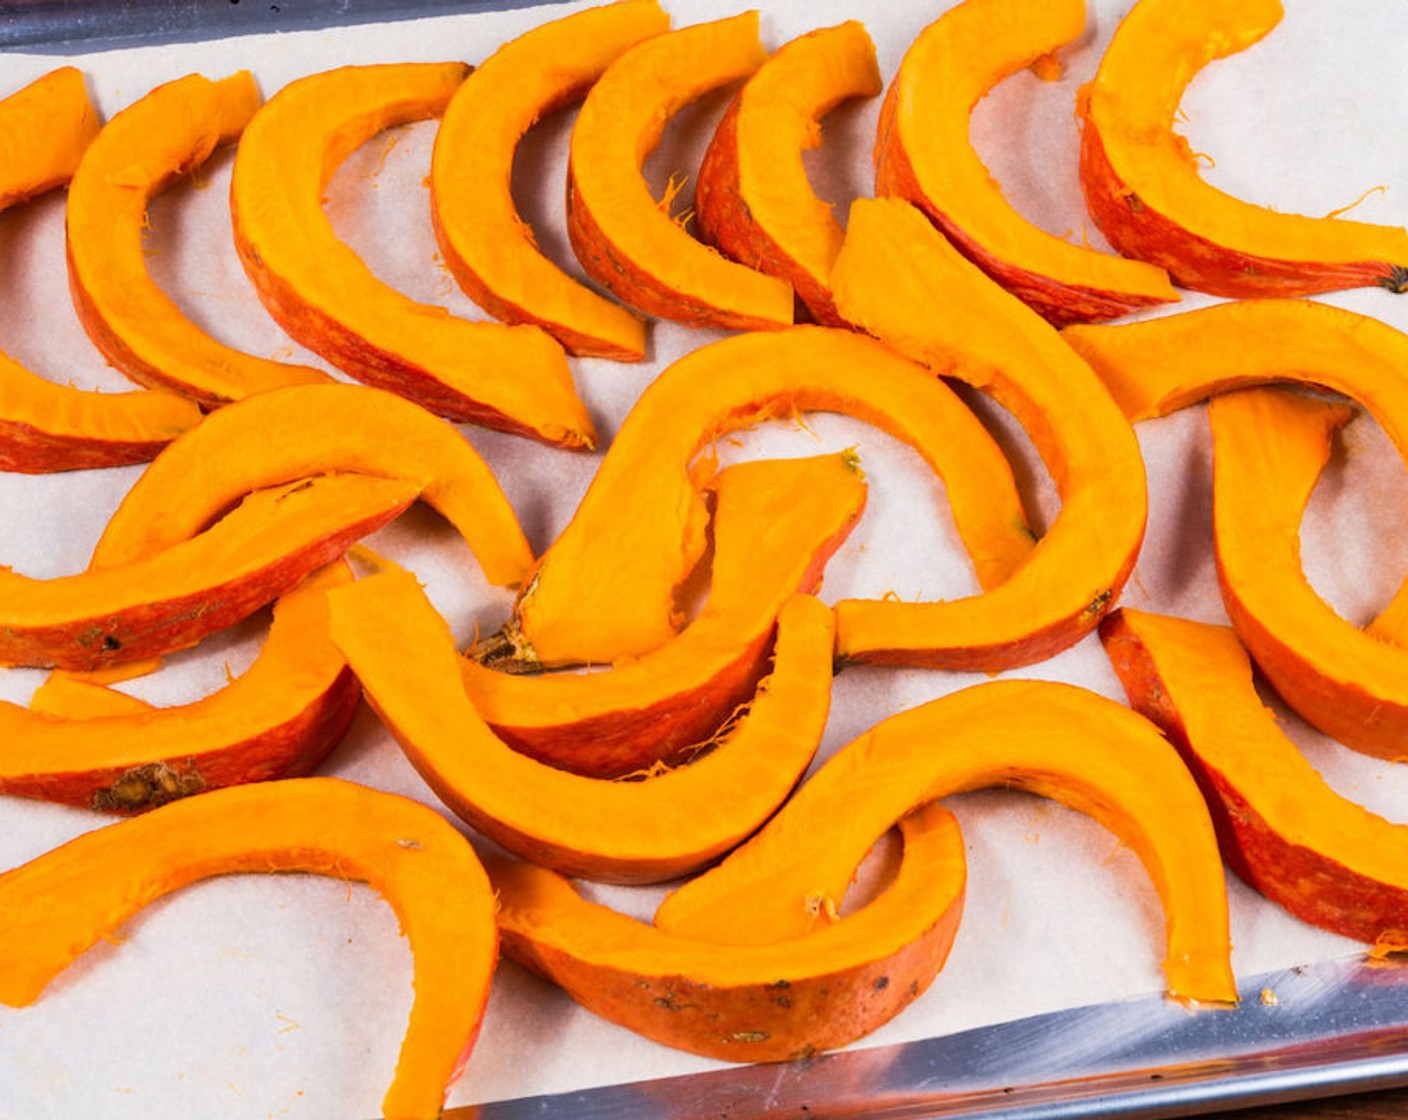 step 3 Transfer the slices onto a baking sheet lined with parchment paper. Drizzle the pumpkin with Extra-Virgin Olive Oil (2 Tbsp) and rub it on both sides.